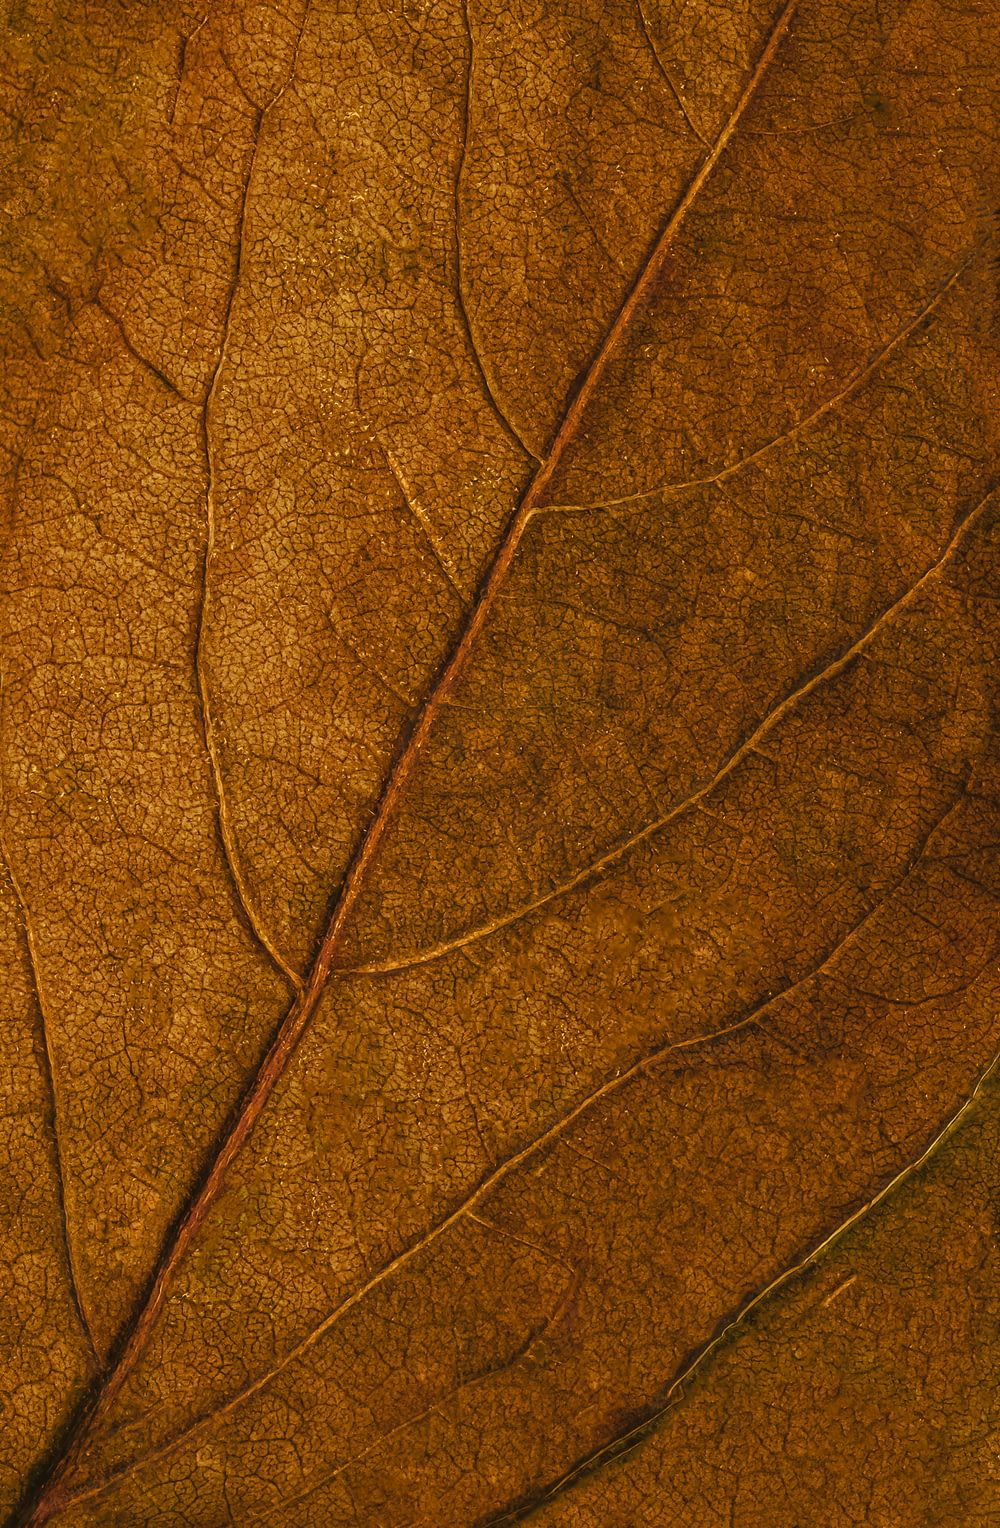 brown and black leaf in close up photography